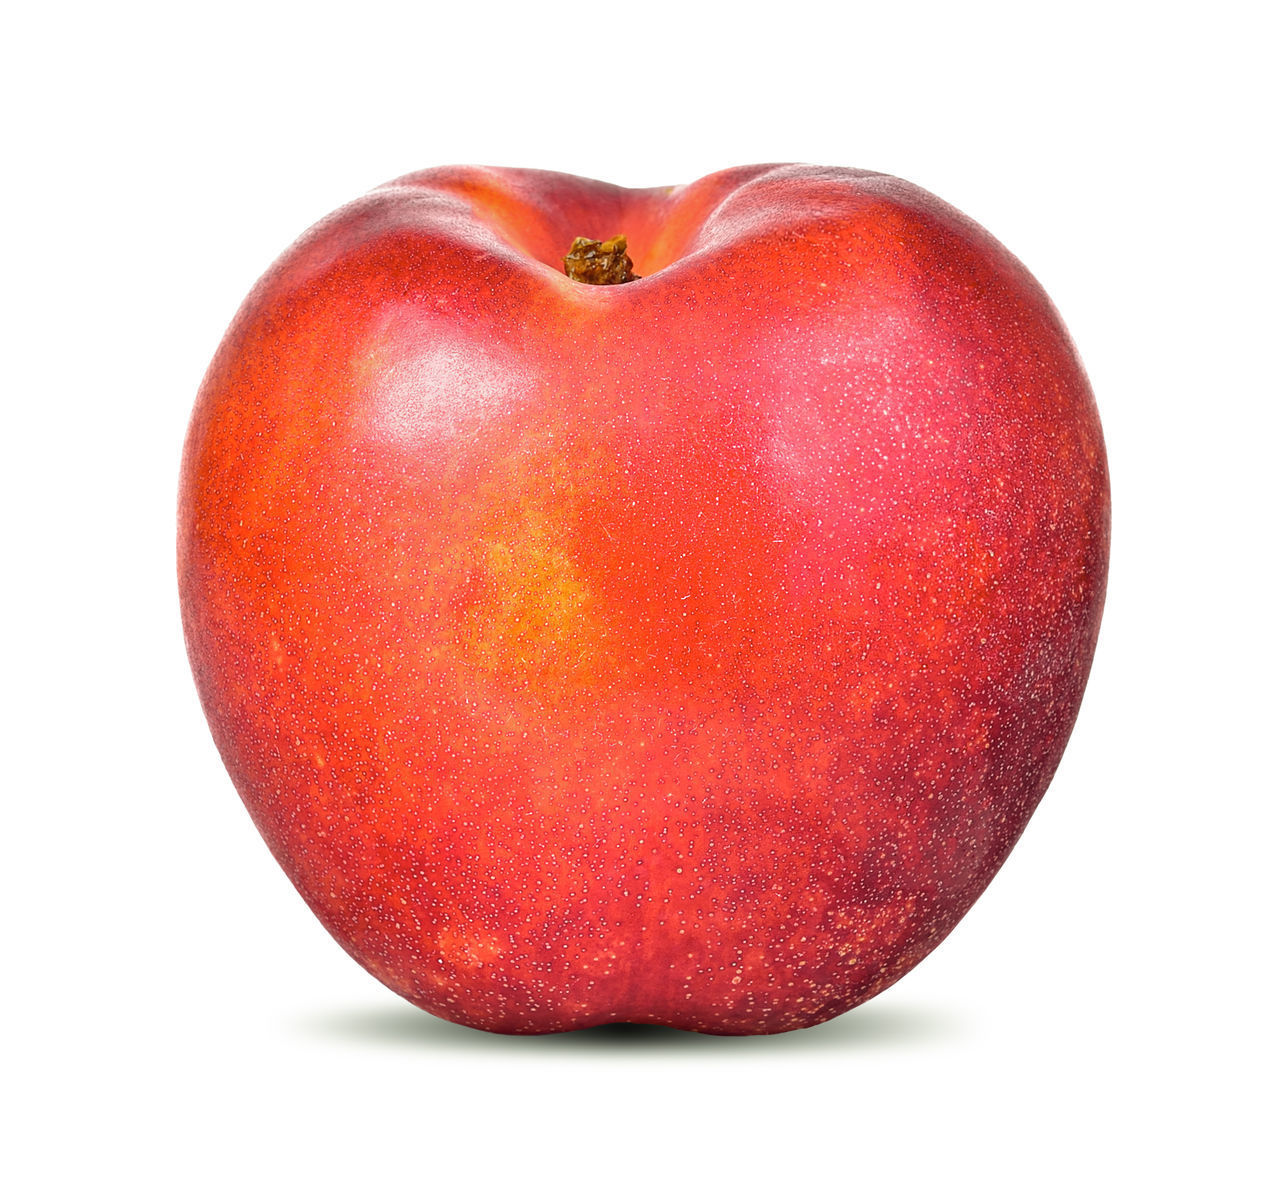 CLOSE-UP OF RED APPLE